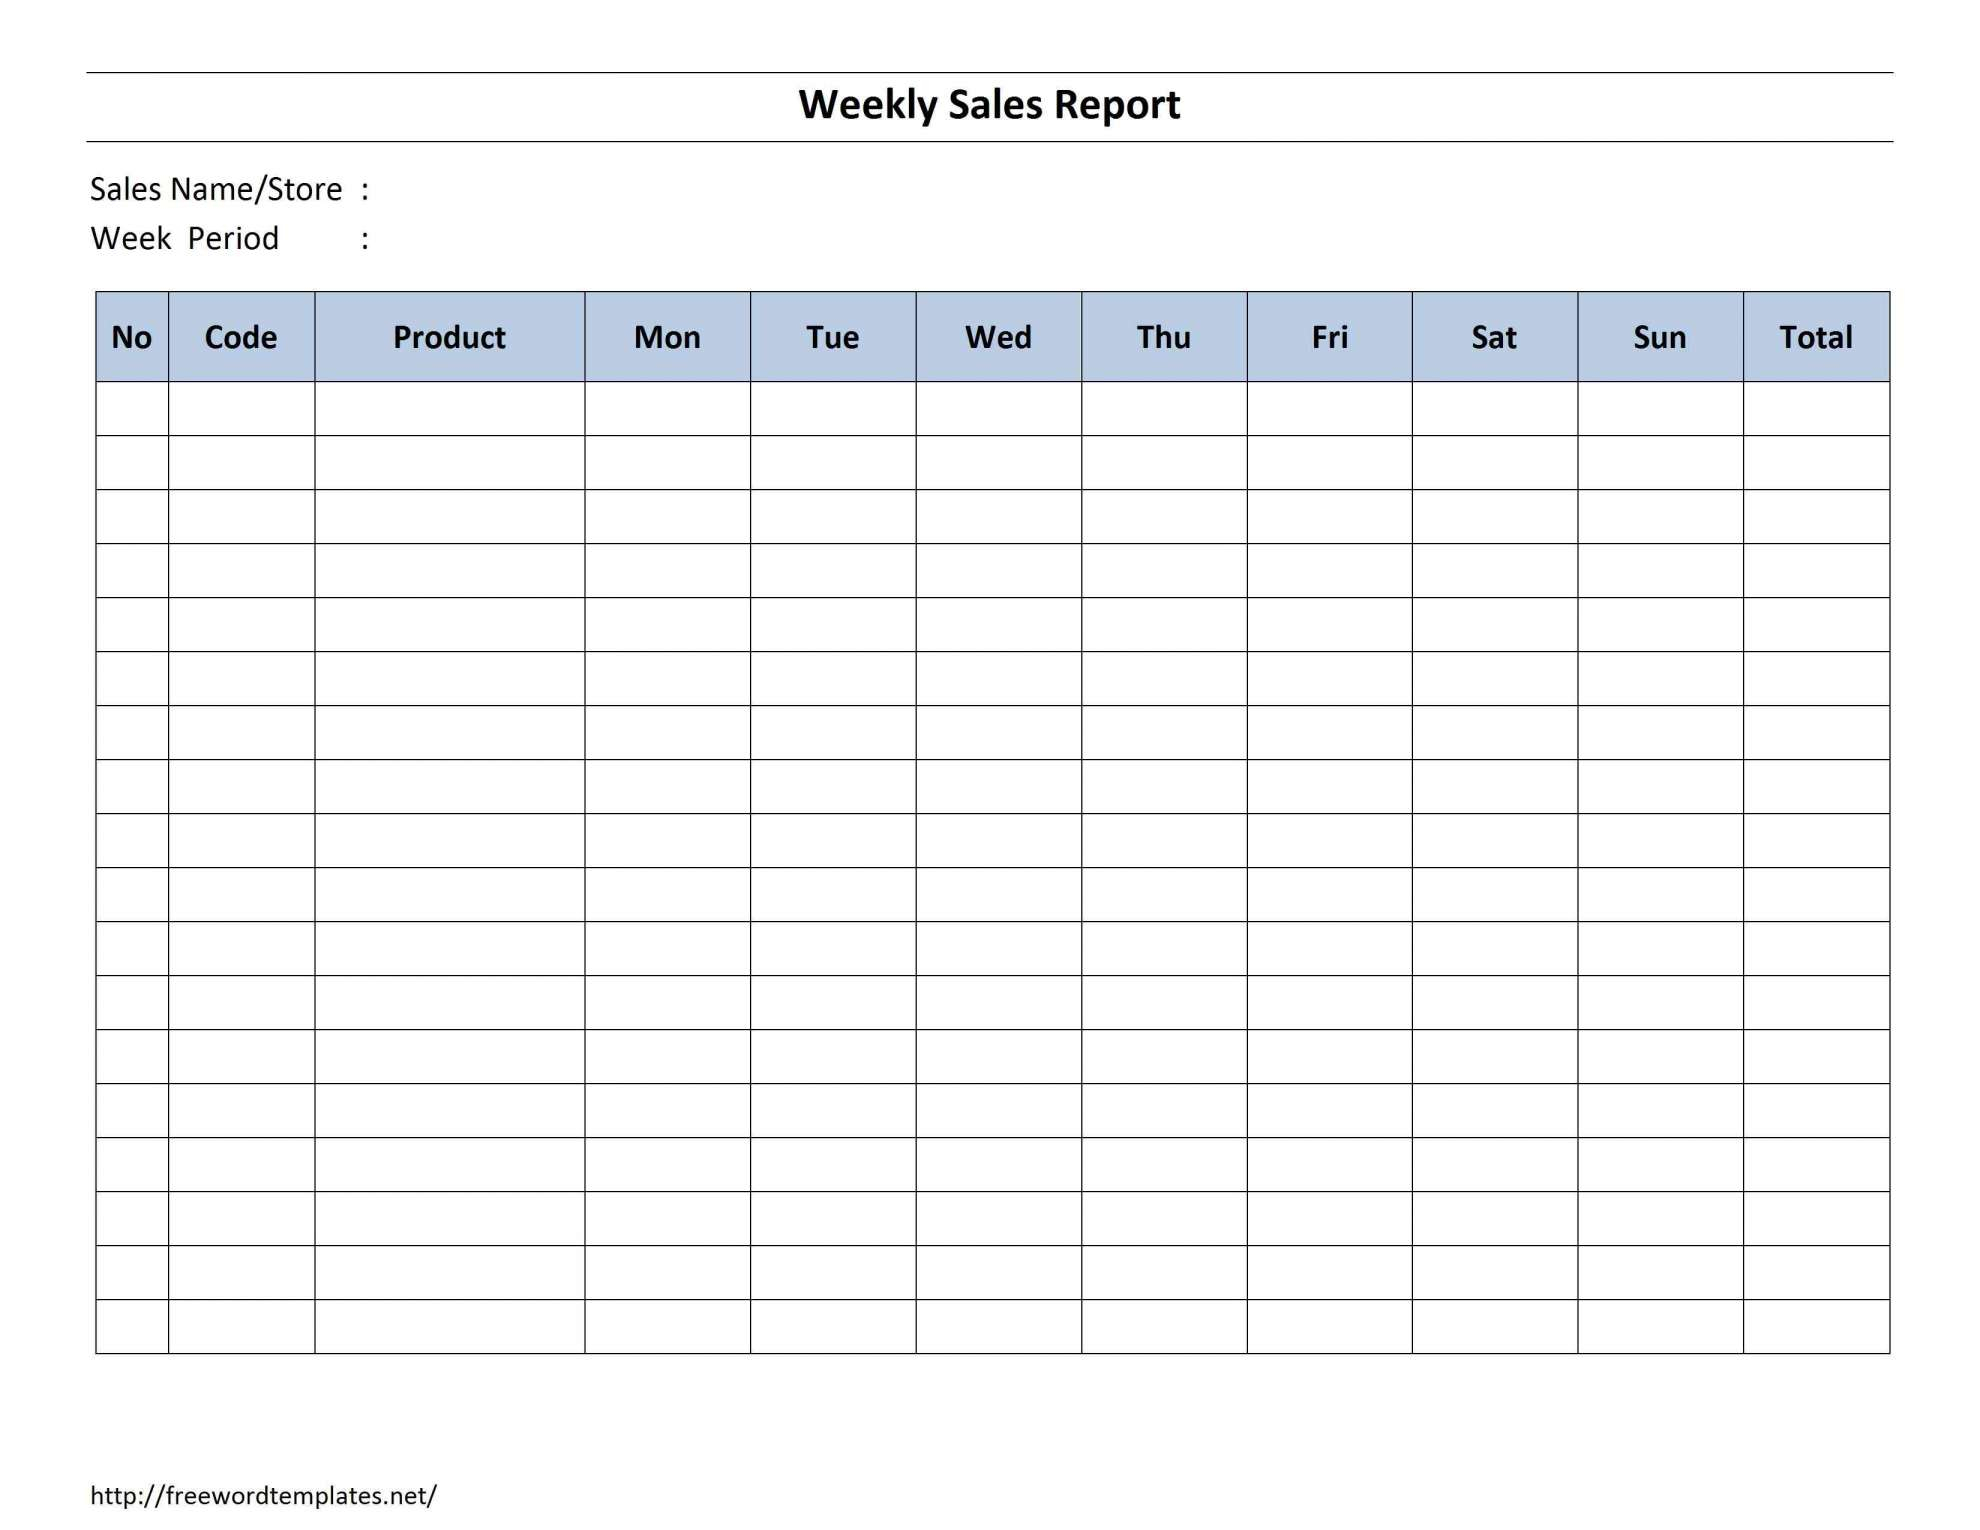 Stage Storage Discharge Spreadsheet Regarding Product Inventory Spreadsheet Sample Worksheets Template  Excel